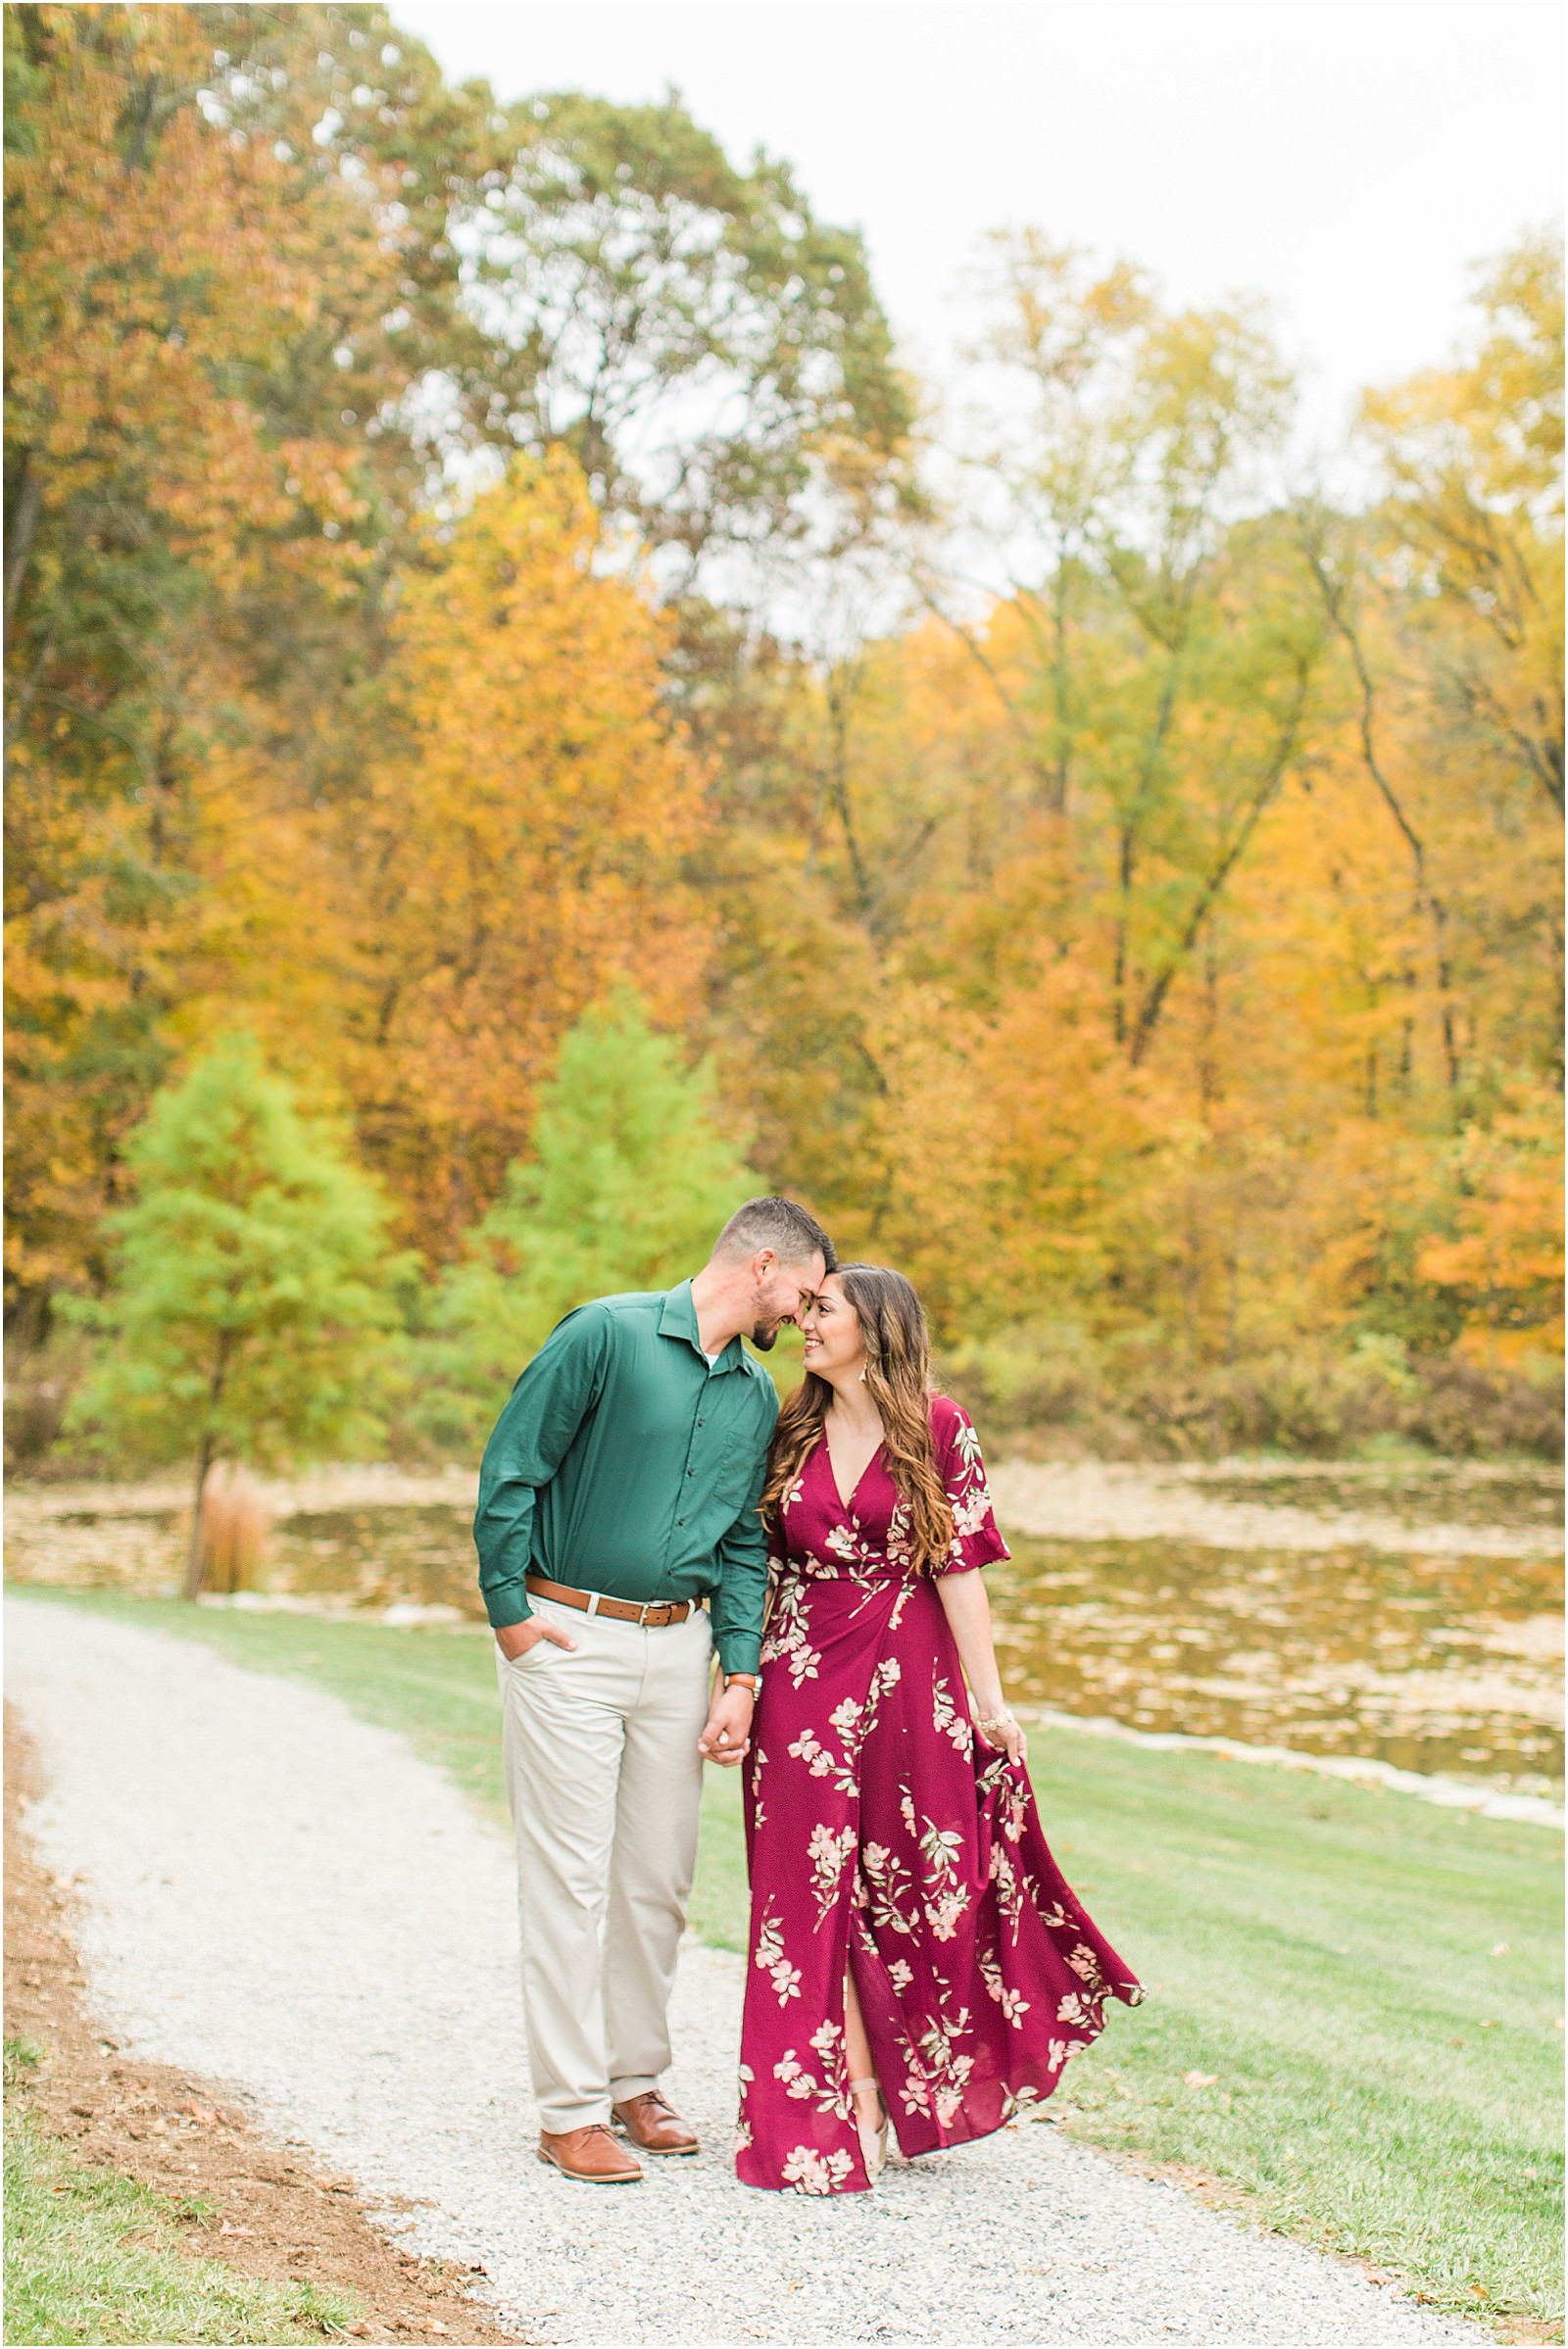 A Fall Oliver Winery Engagement Session | Sally and Andrew | Bret and Brandie Photography 0007.jpg